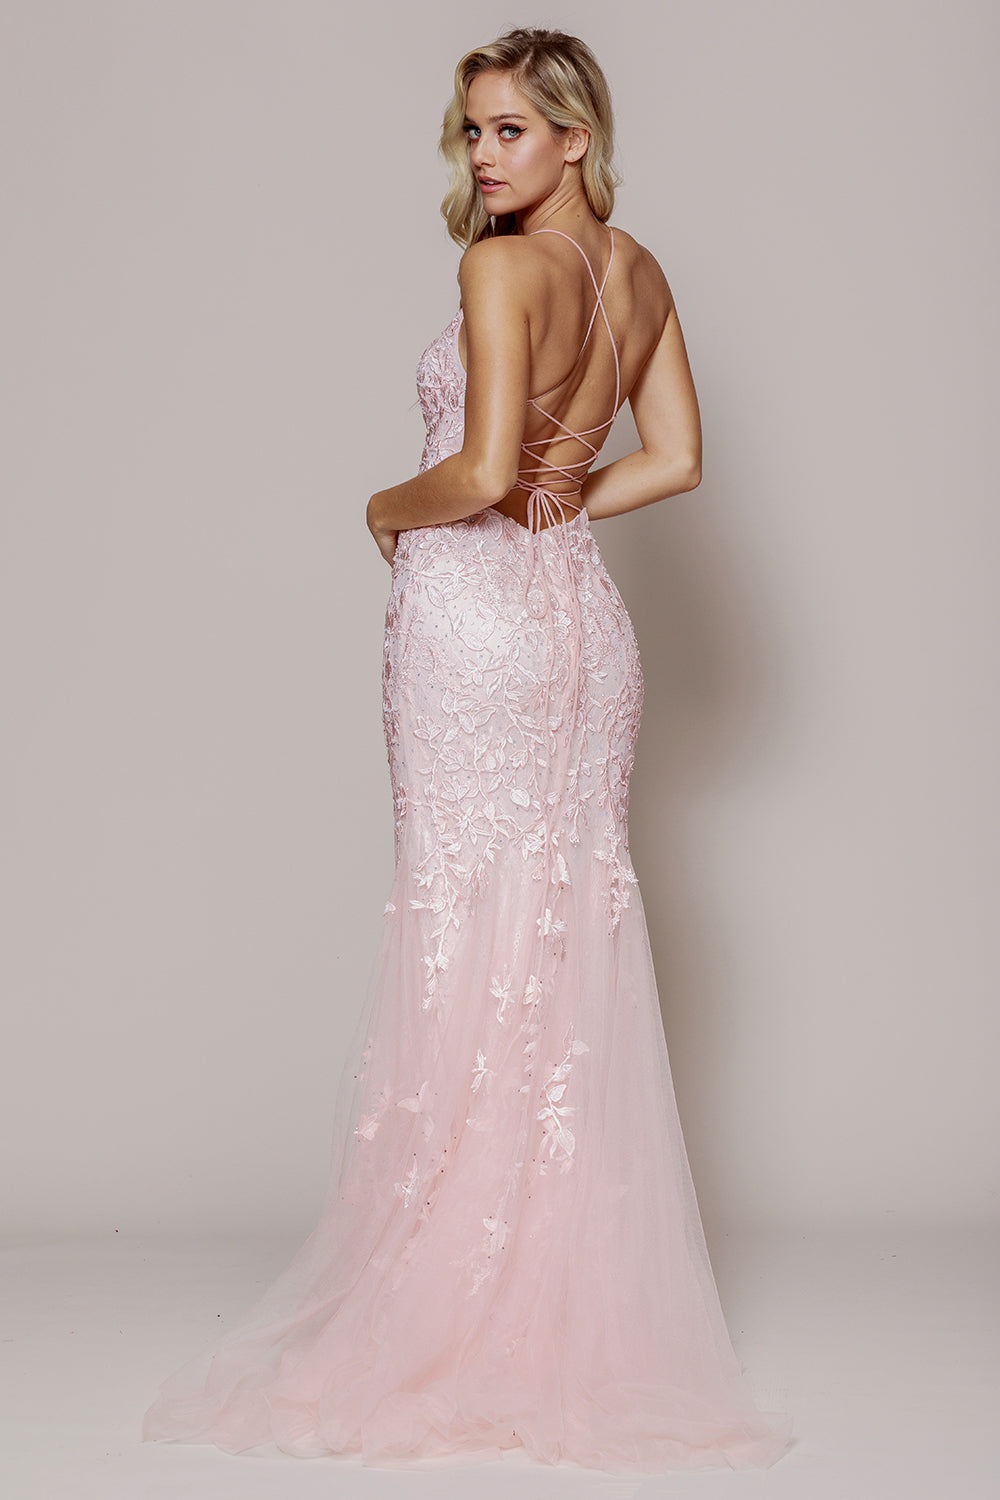 AC 799 - Floral Lace Applique Over Tulle Fit & Flare Prom Gown